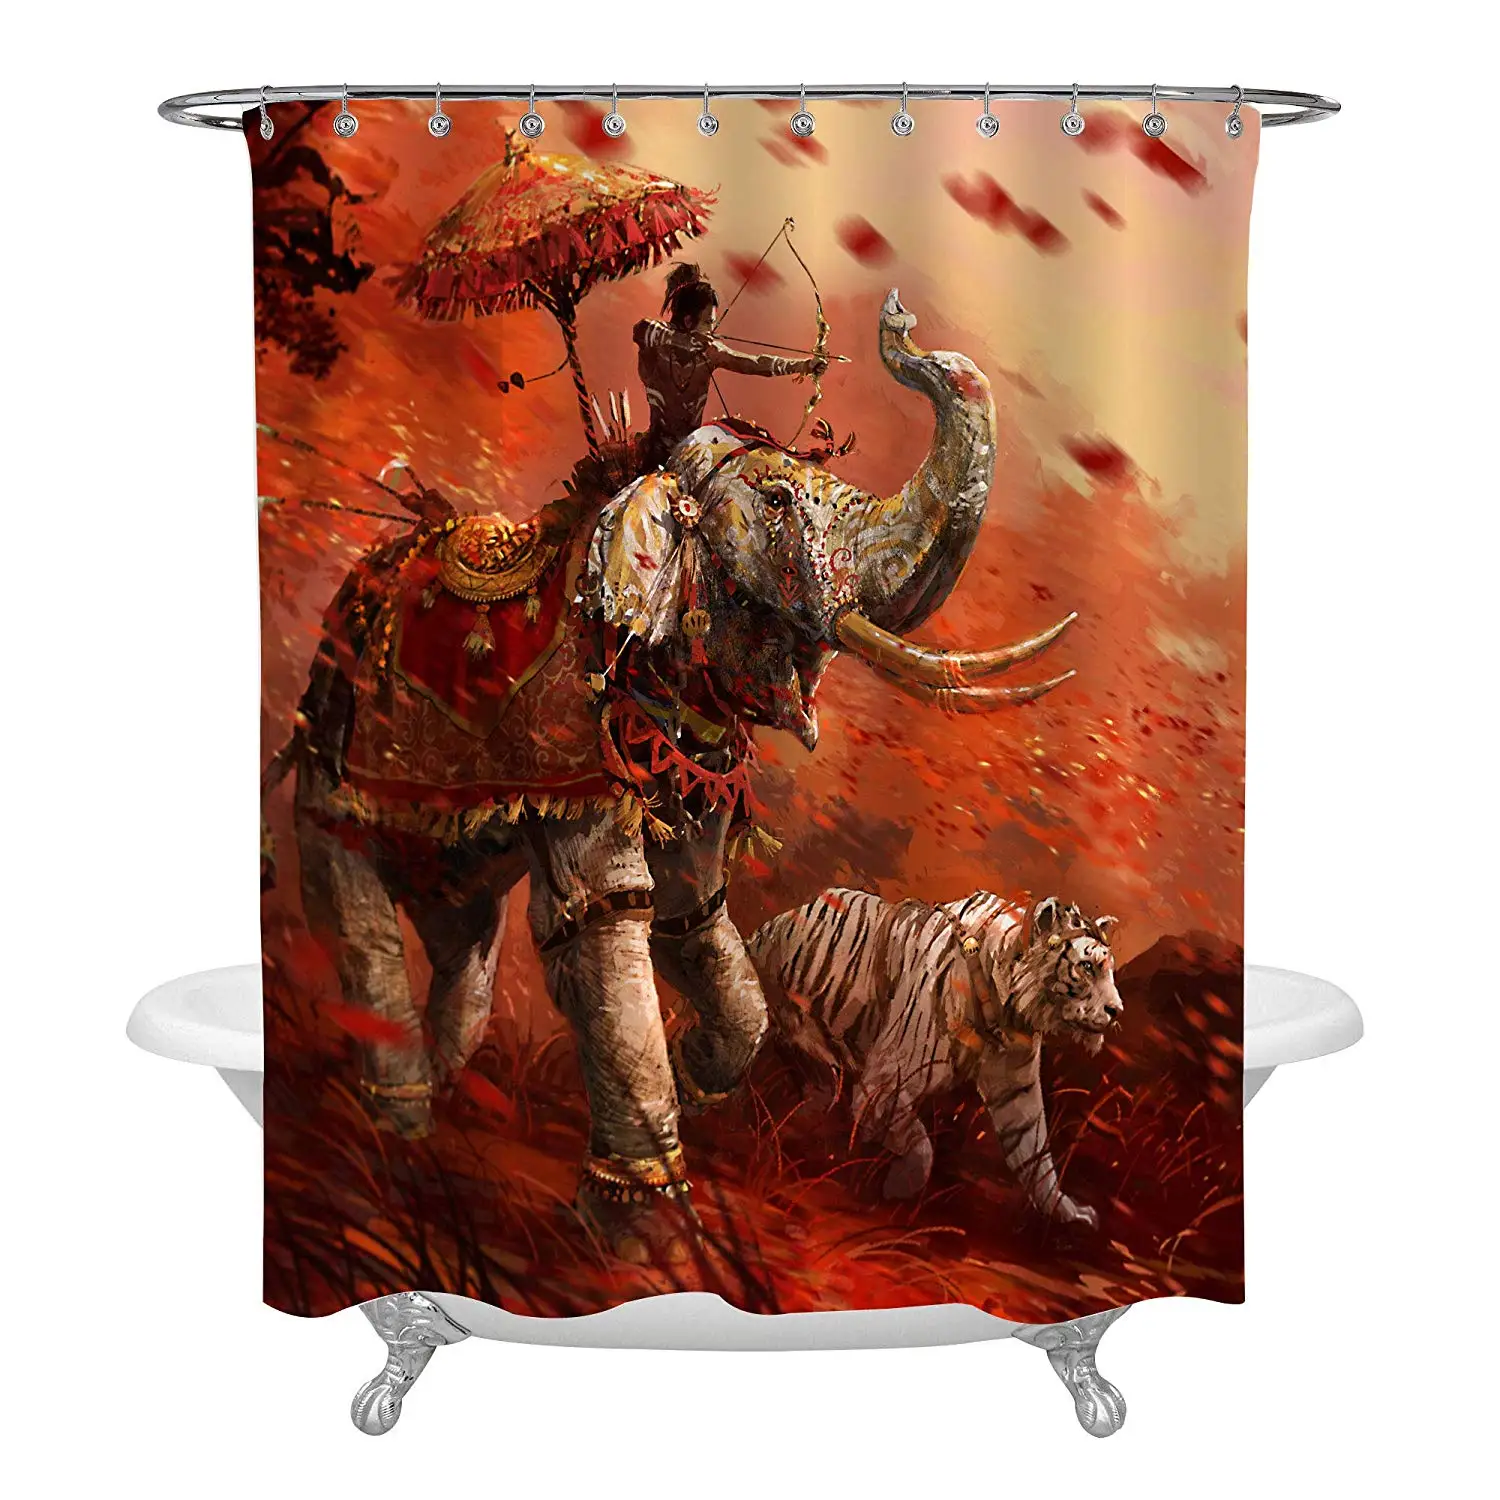 

Animals Elephant and Tiger Charge Forward with a Archer Premium Waterproof Fabric Men and Kids Bathroom Decorations